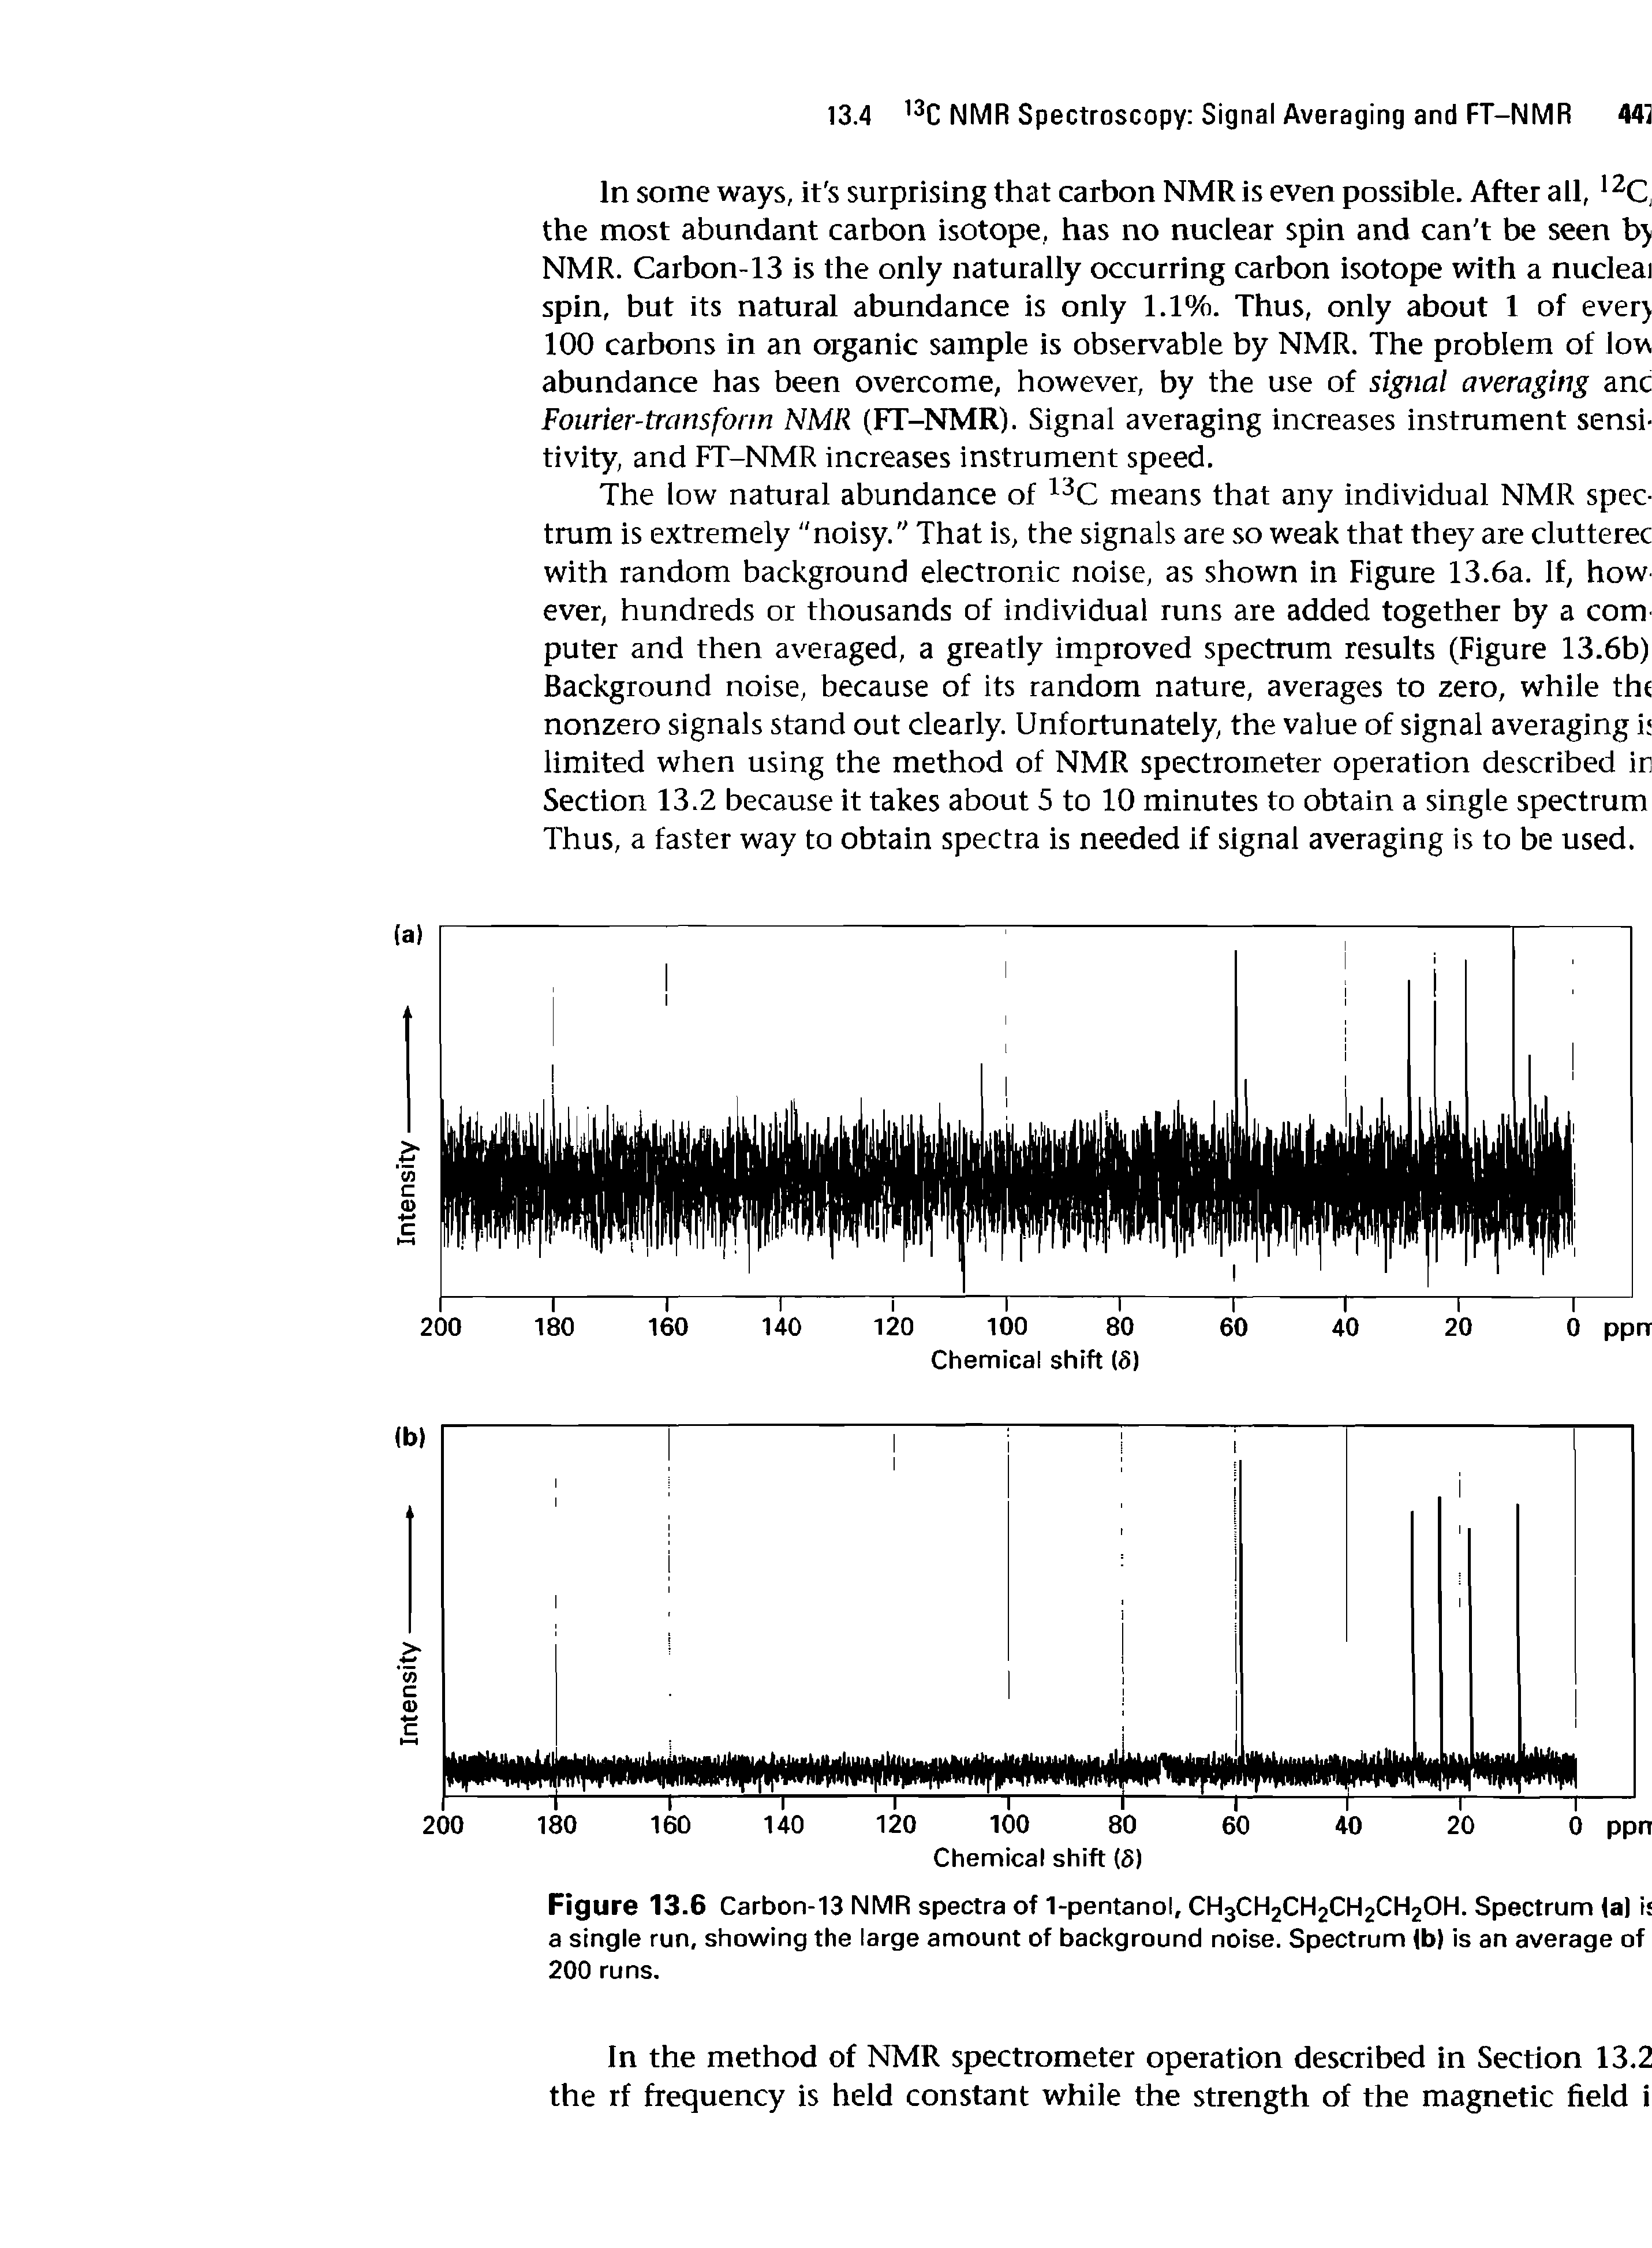 Figure 13.6 Carbon-13 NMR spectra of 1-pentanol, CH3CH2CH2CH2CH2OH. Spectrum (a) i a single run, showing the large amount of background noise. Spectrum lb) is an average of 200 runs.